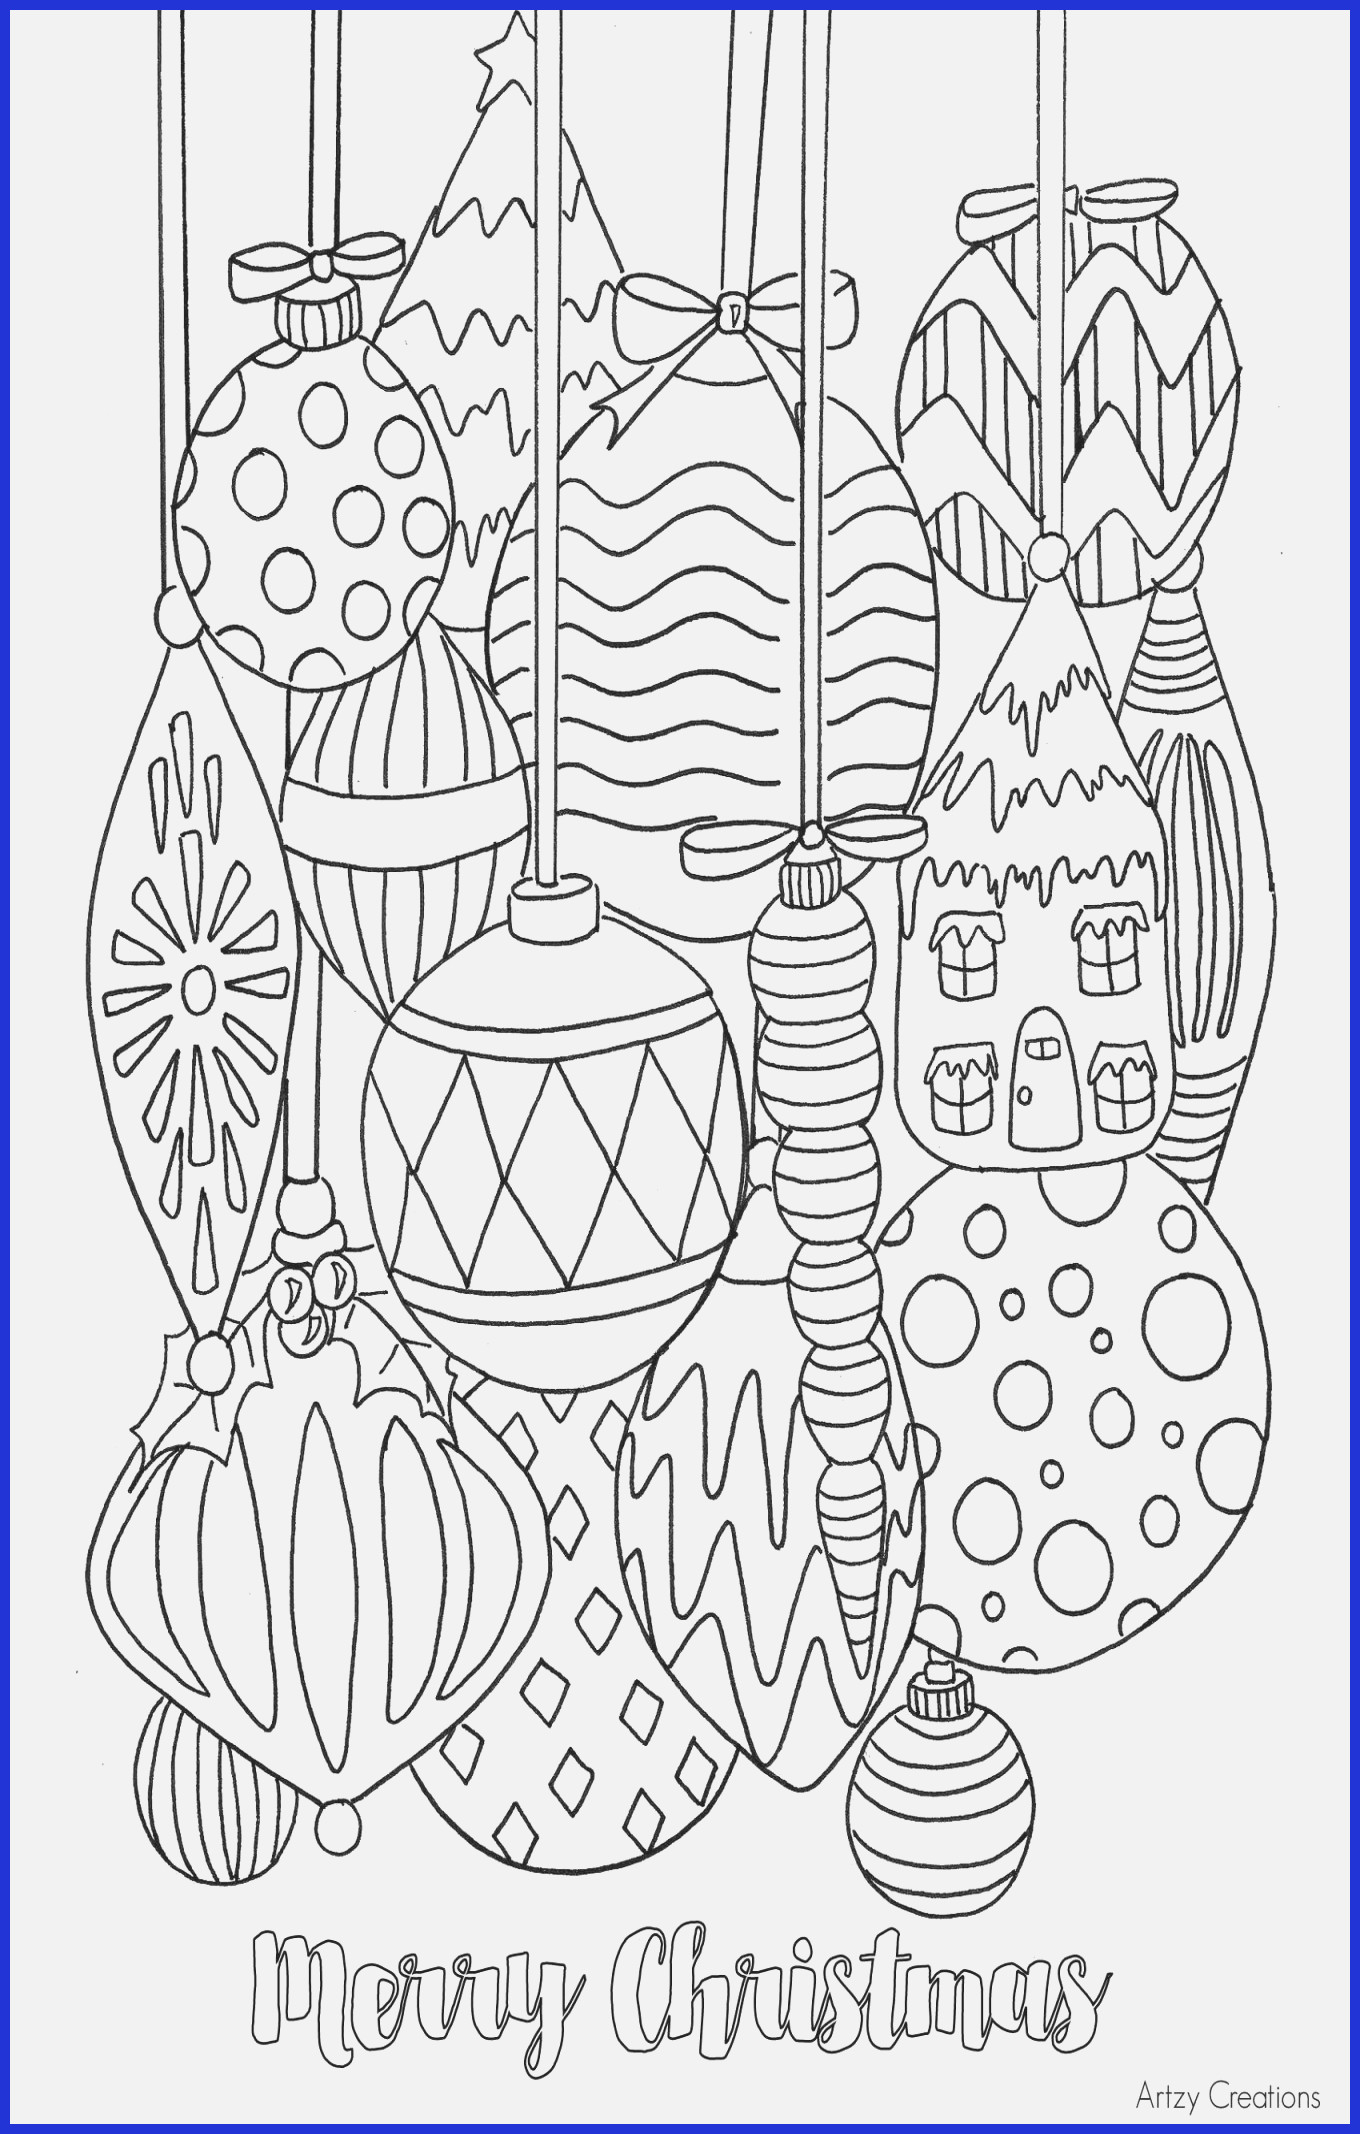 Giant Coloring Pages For Adults 16 Giant Coloring Books For Adults Wwwgsfl